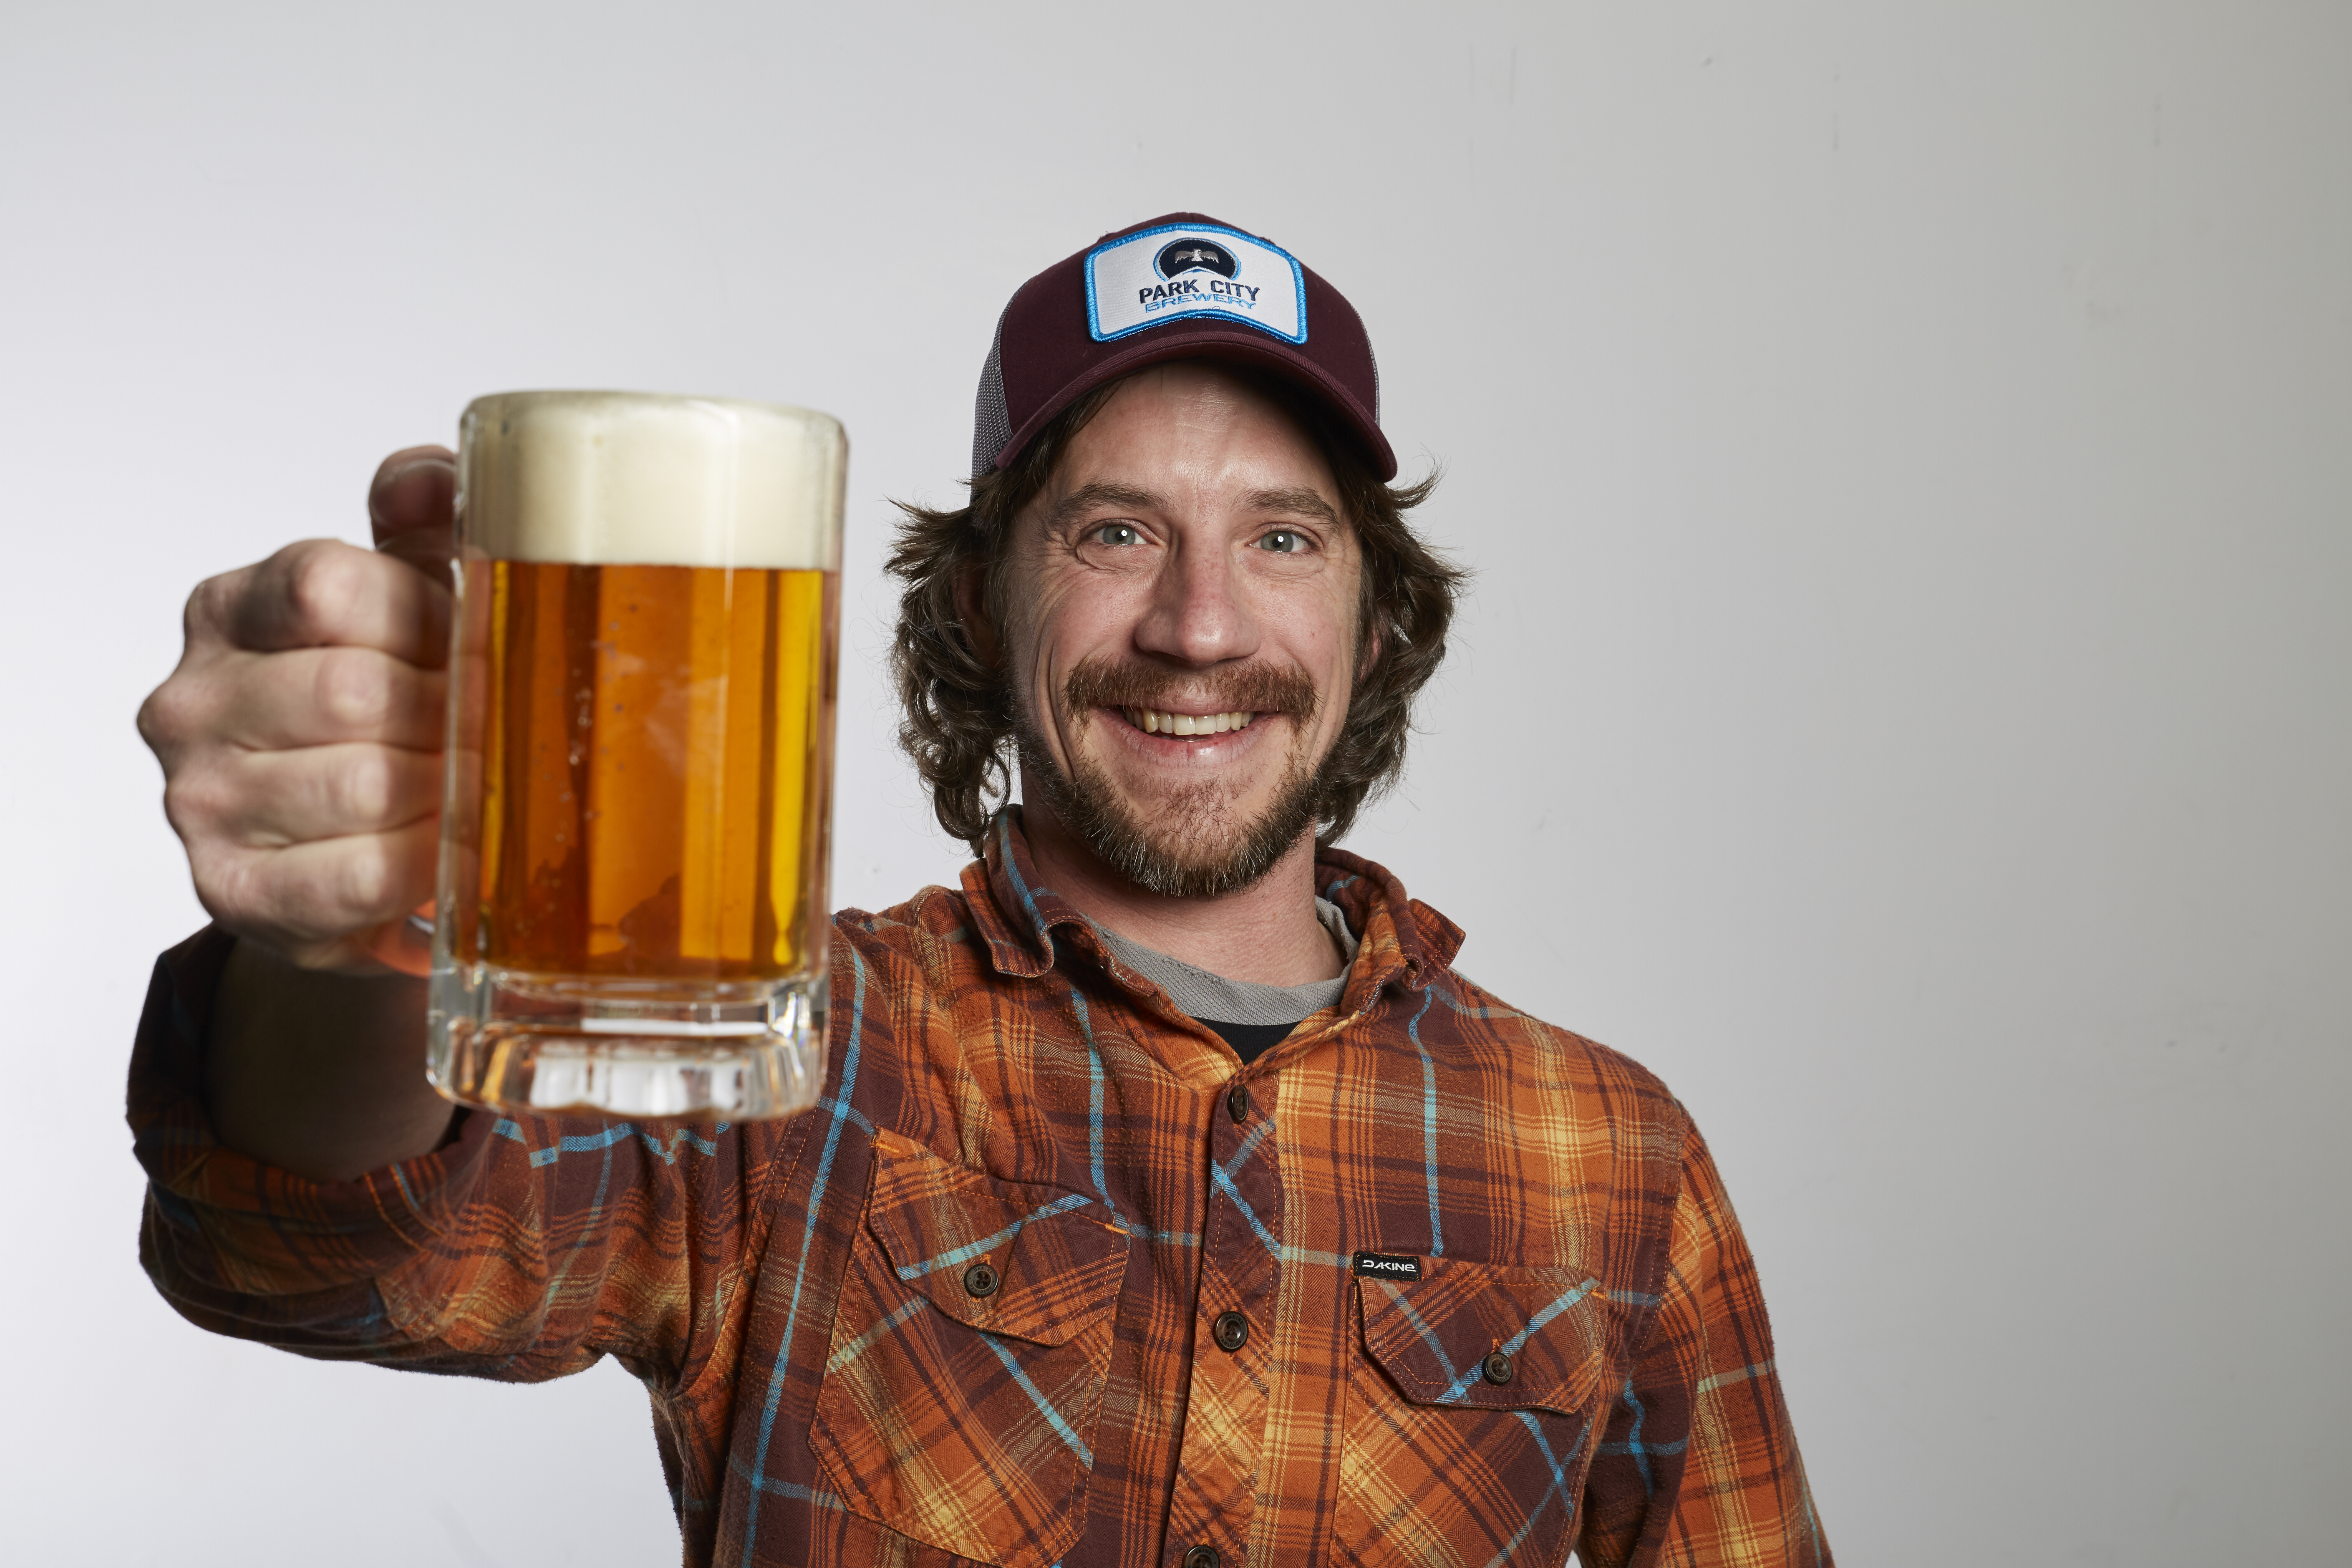 Passion for Local Craft Beers in Park City